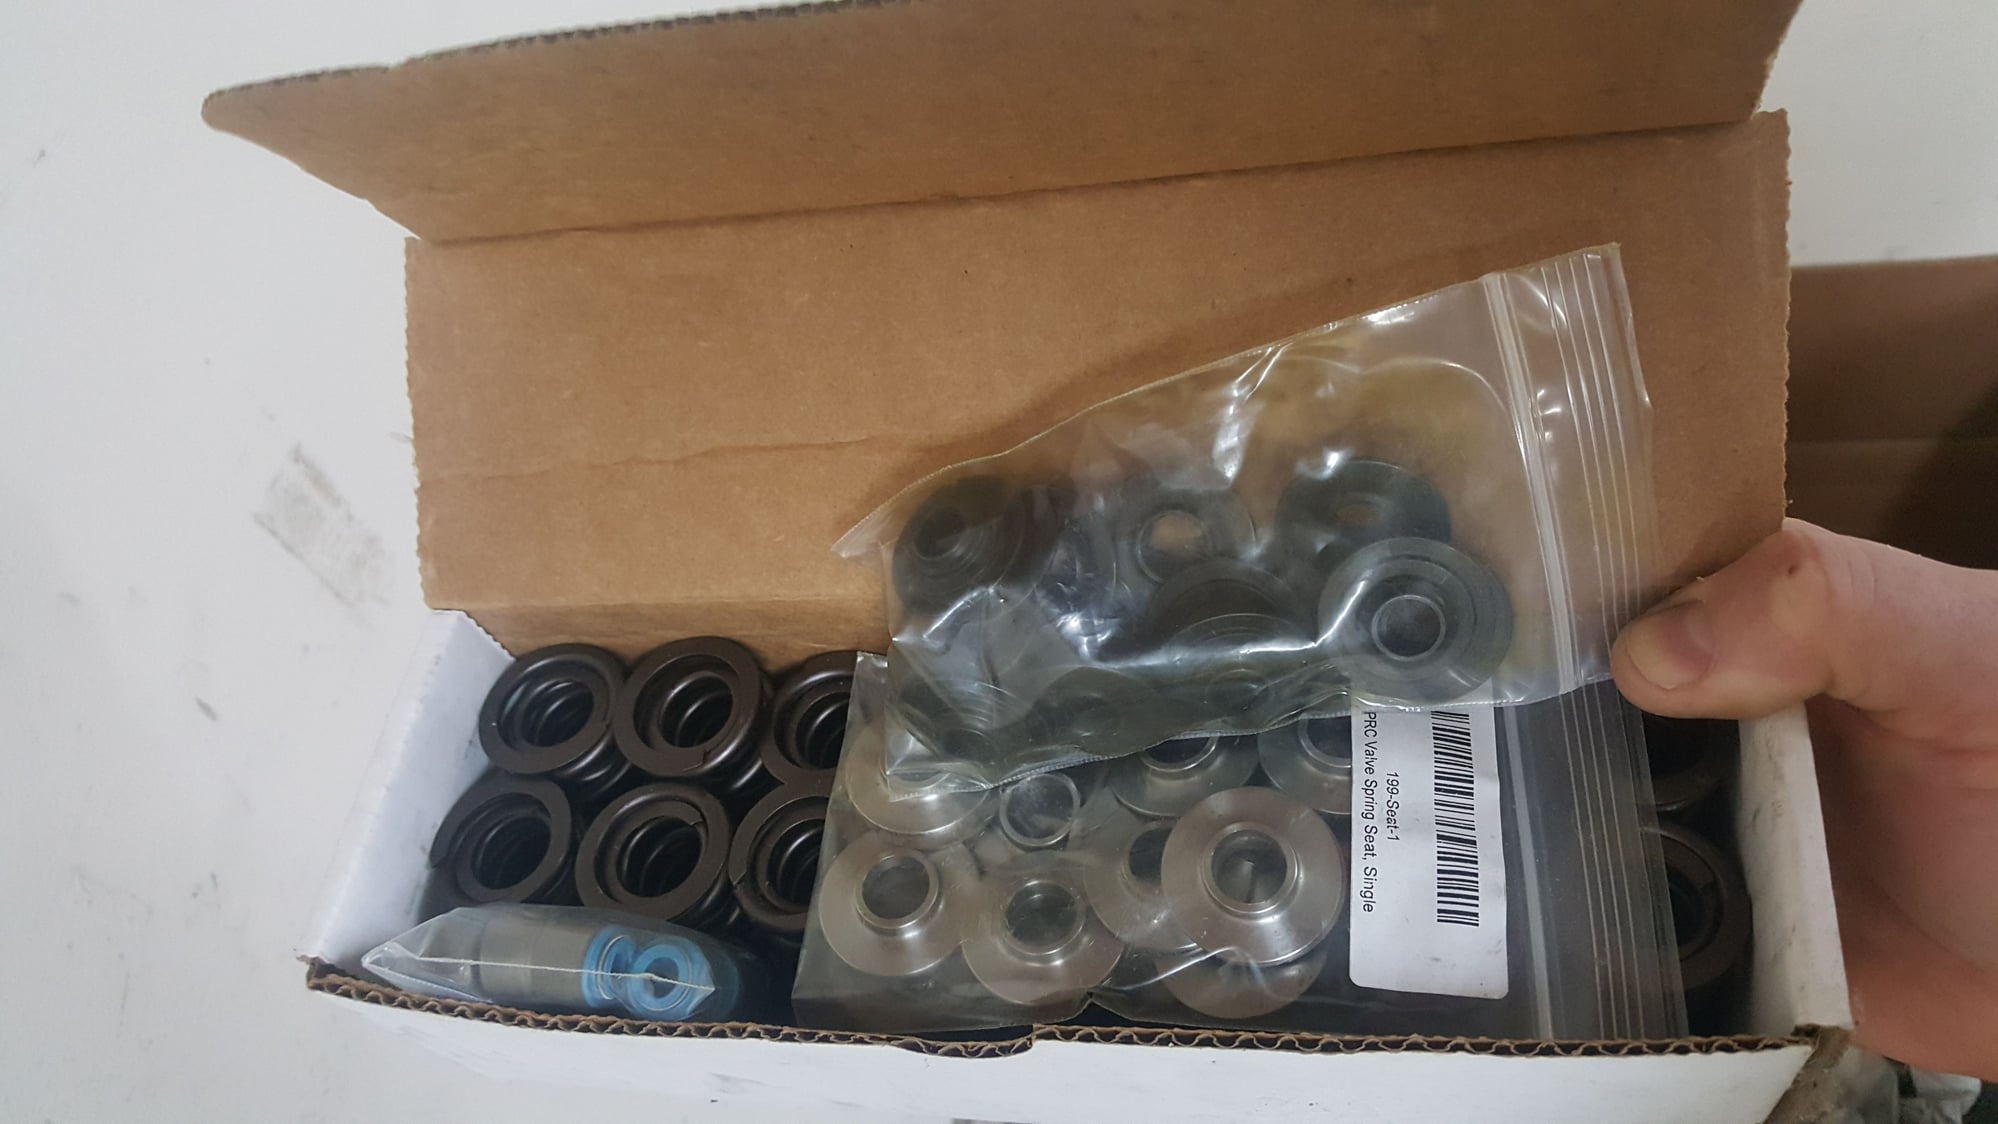 Engine - Internals - New, tsp complete cam kit, comp upgraded trunions, gaskets bolts more all new ! - New - All Years Any Make All Models - Glenville, PA 17329, United States